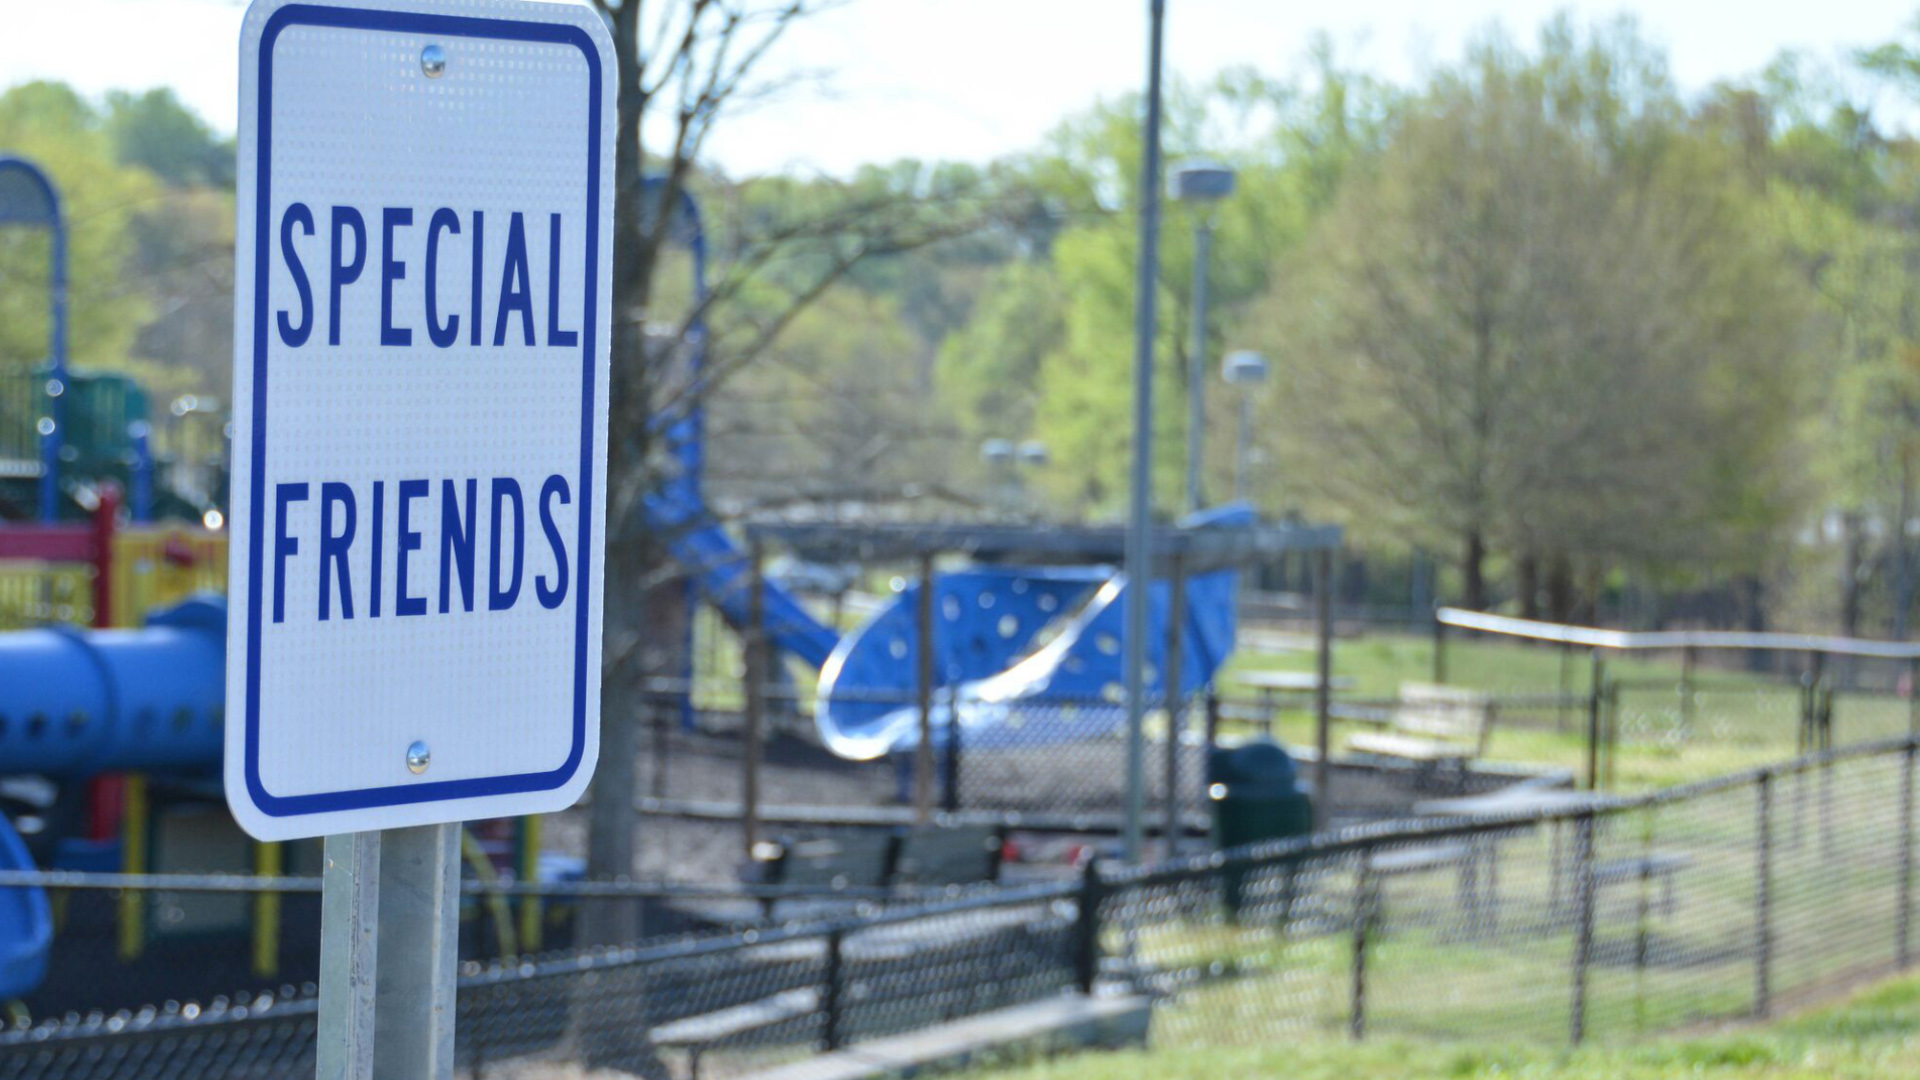 A Special Friends parking sign in the Brookwood Church parking lot